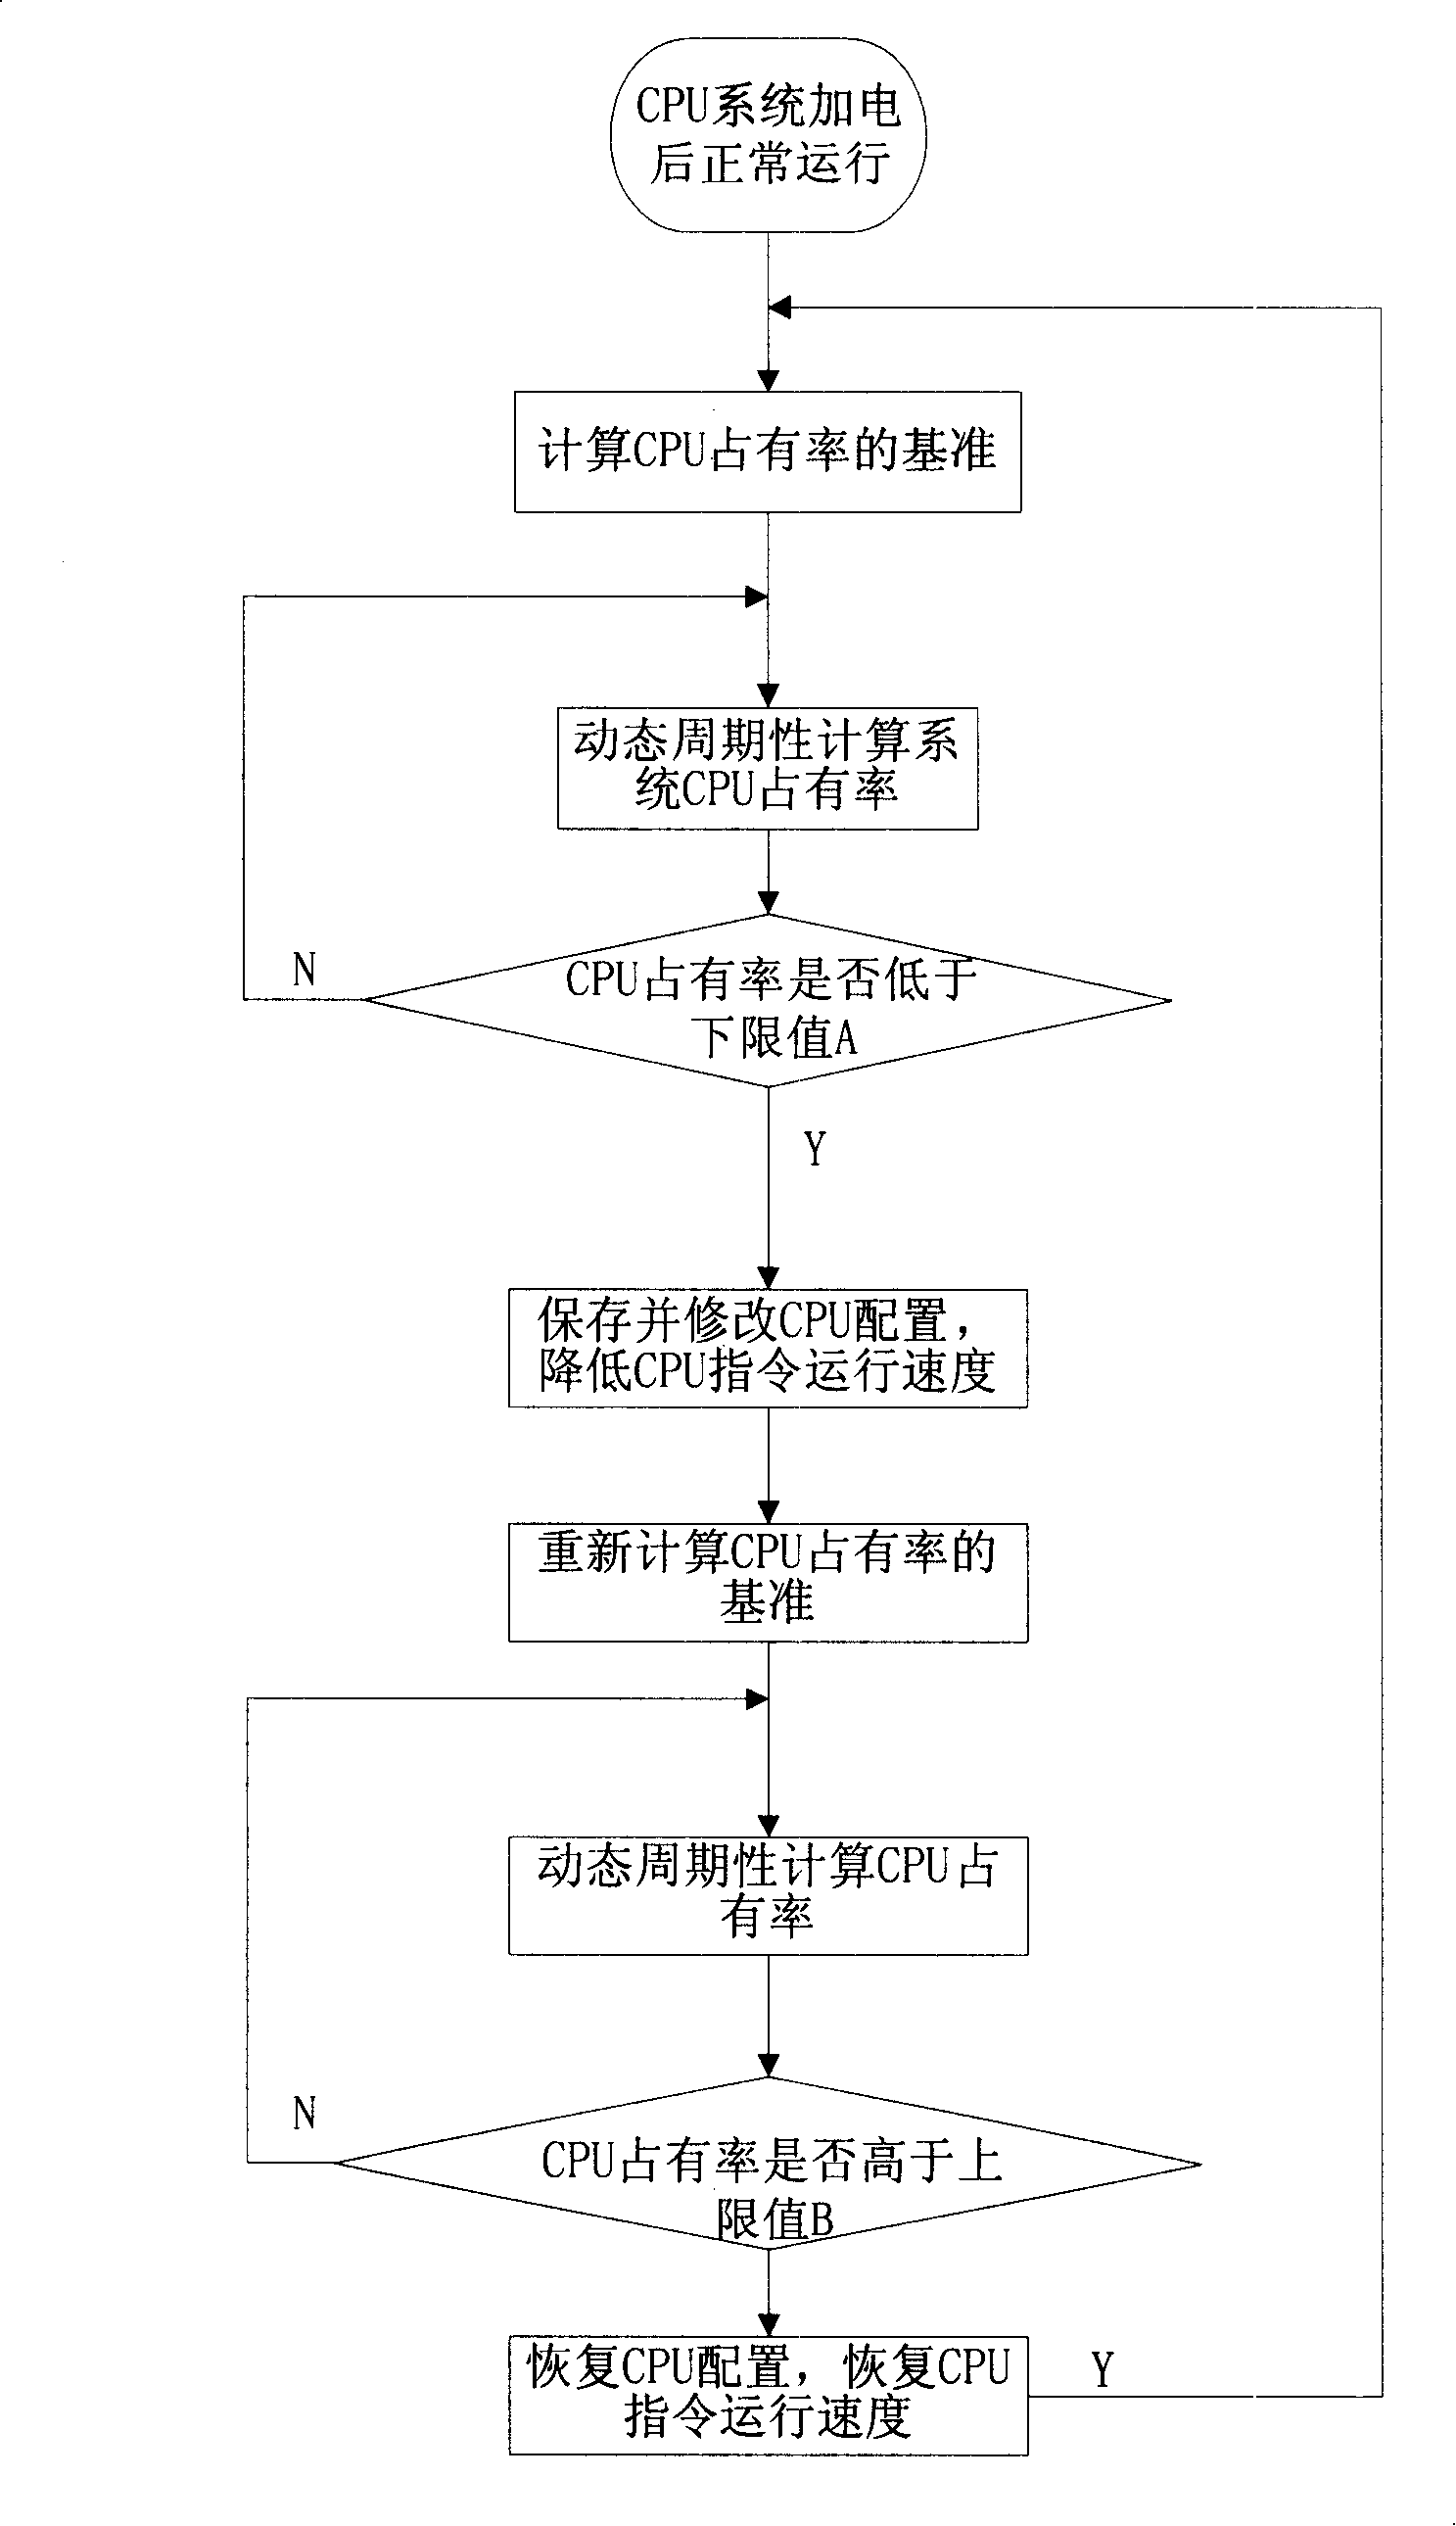 Method for dynamic reducing CPU power consumption